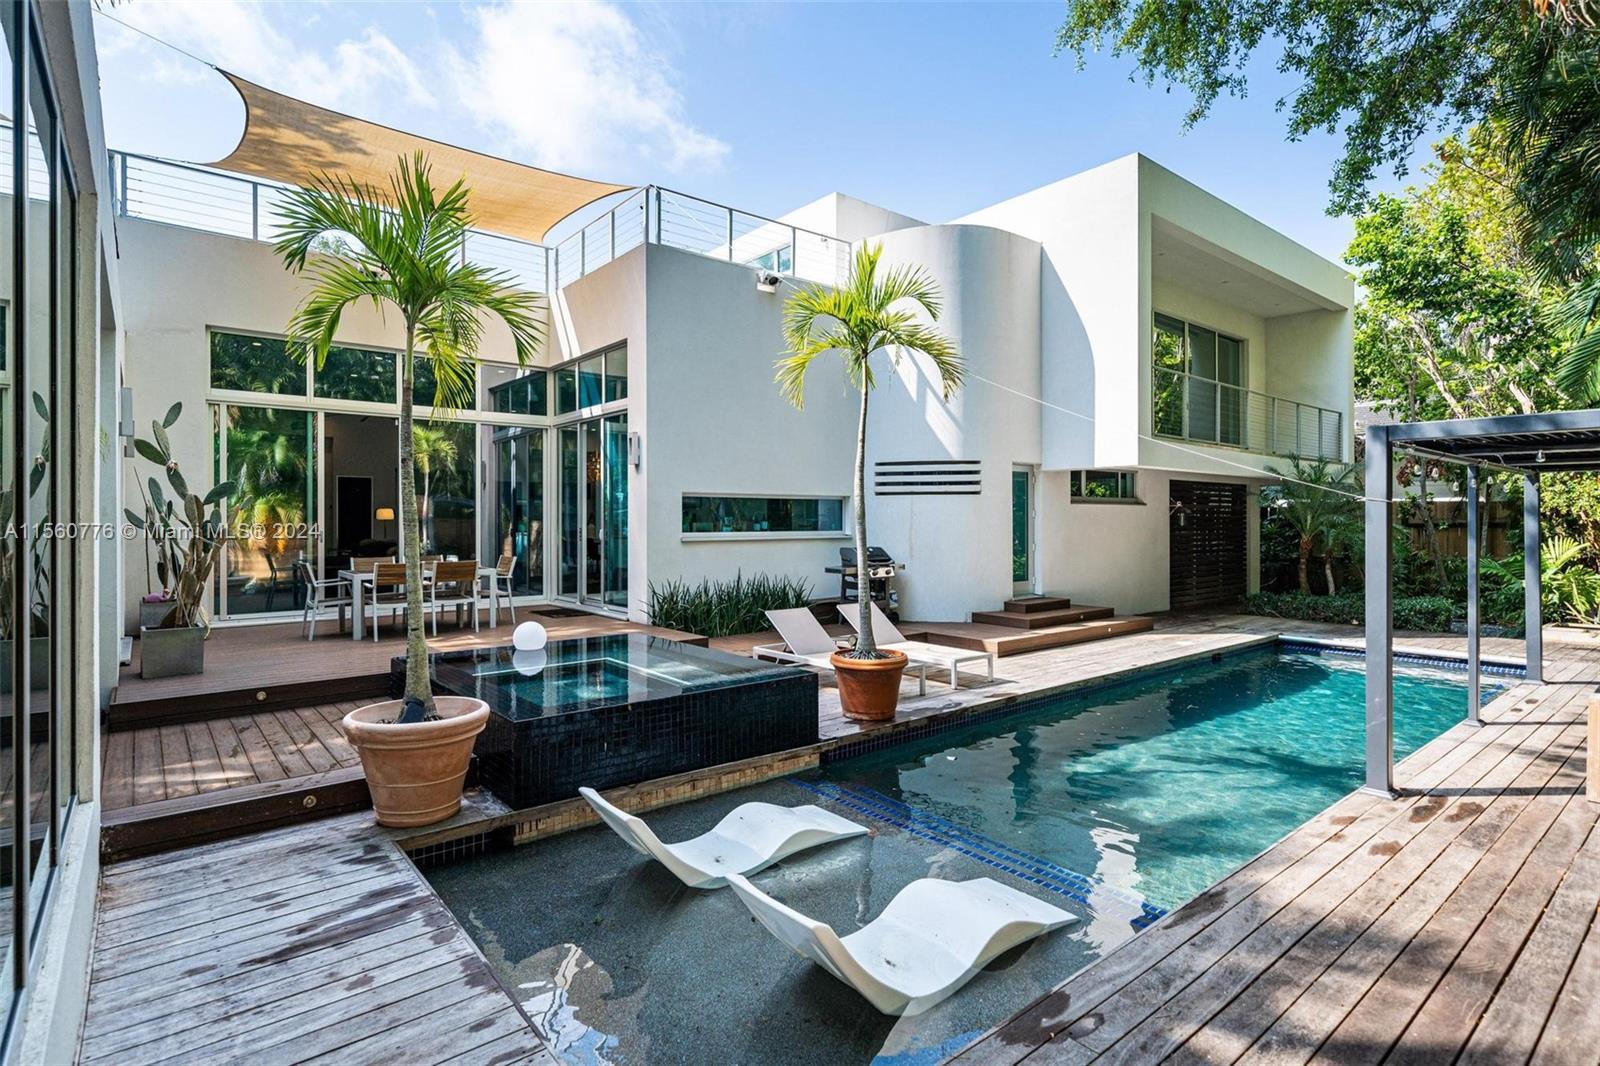 Discover this ultra-chic, gated contemporary gem in the sought-after Grove area.
The sophisticated 